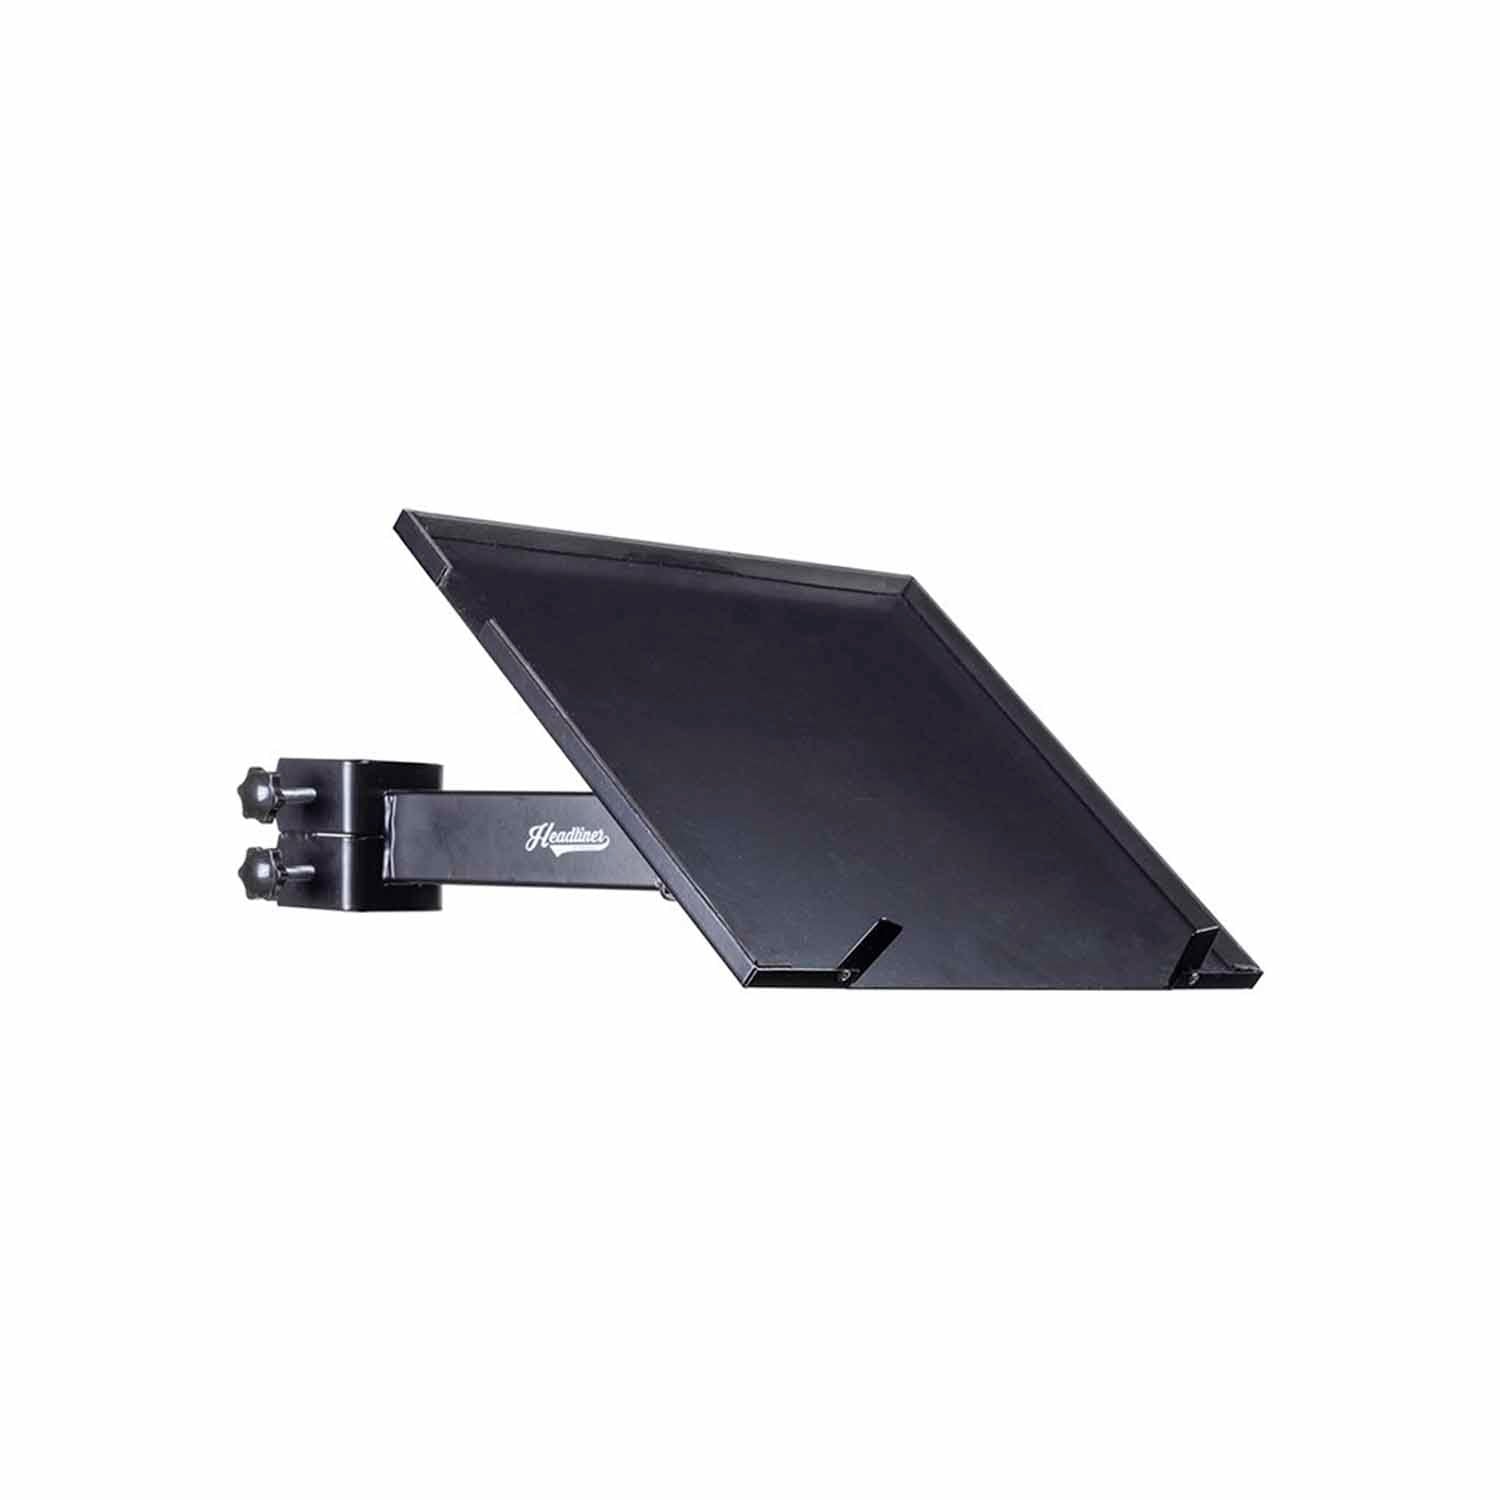 Headliner HL31000, Accessory Tray For Mic Stands, Speakers Stands and Lighting Bars Mount - Hollywood DJ